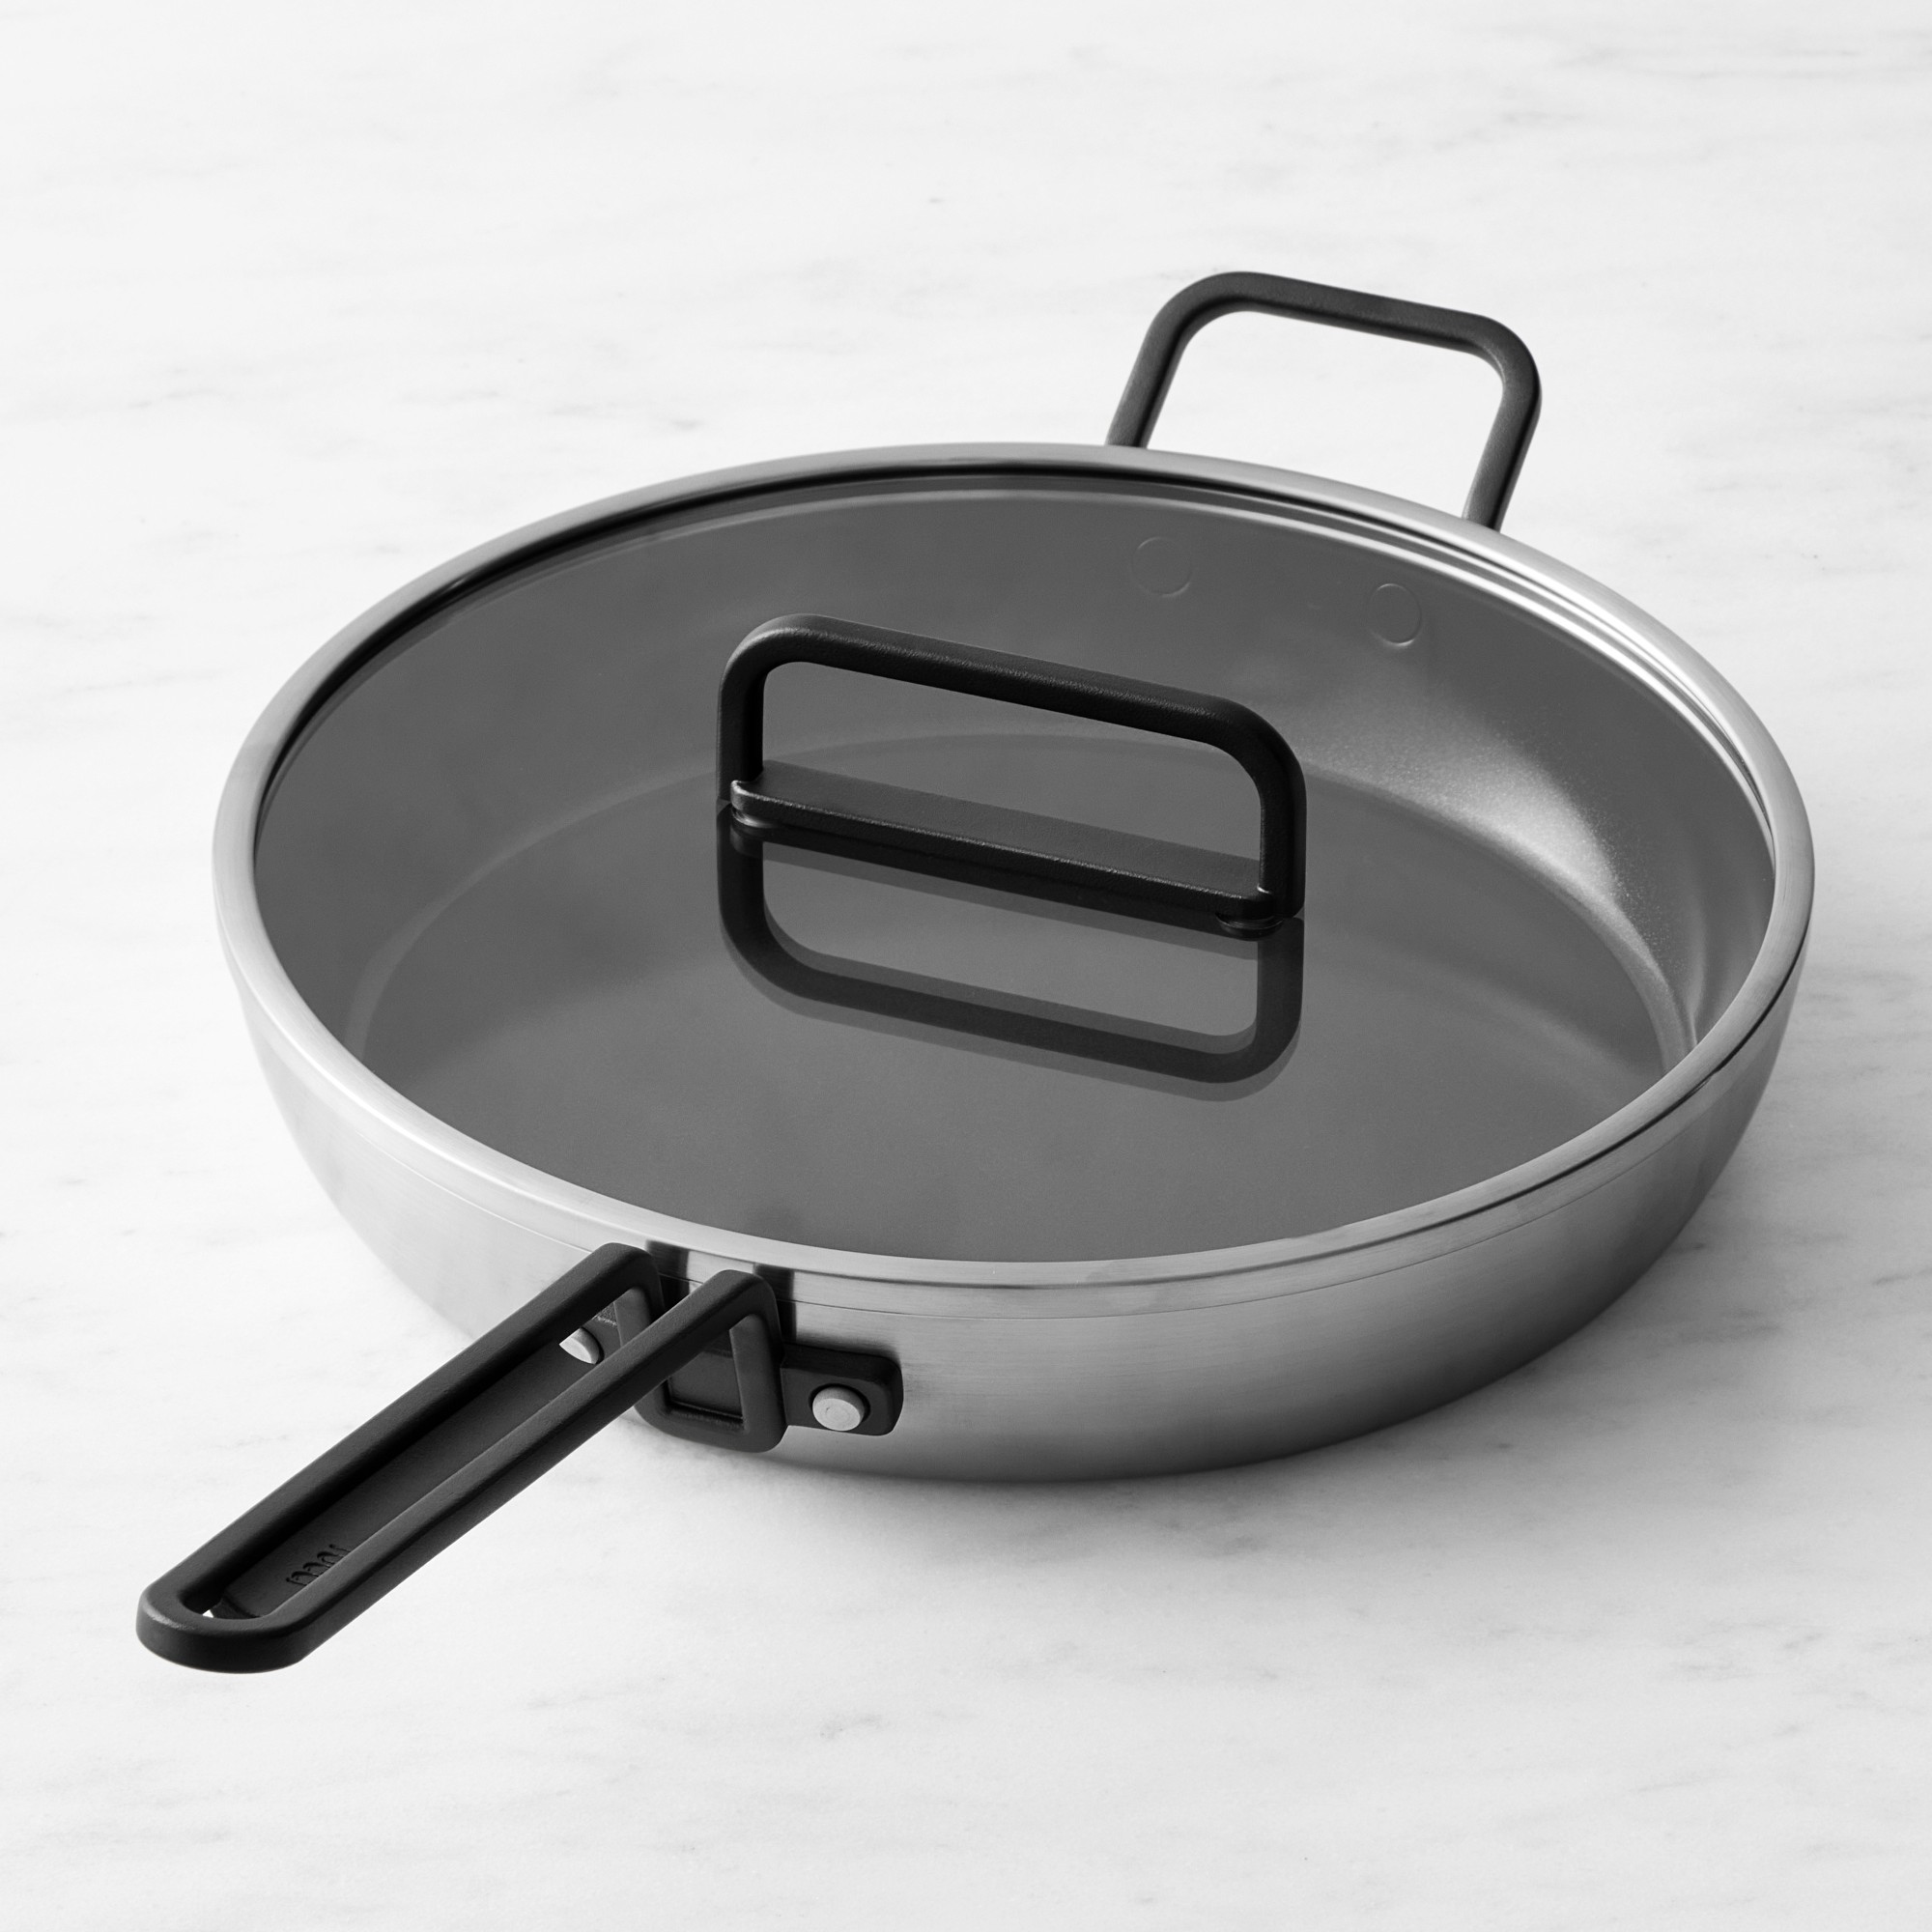 GreenPan™ Stanley Tucci™ Stainless-Steel Ceramic Nonstick Covered Fry Pan, 12"